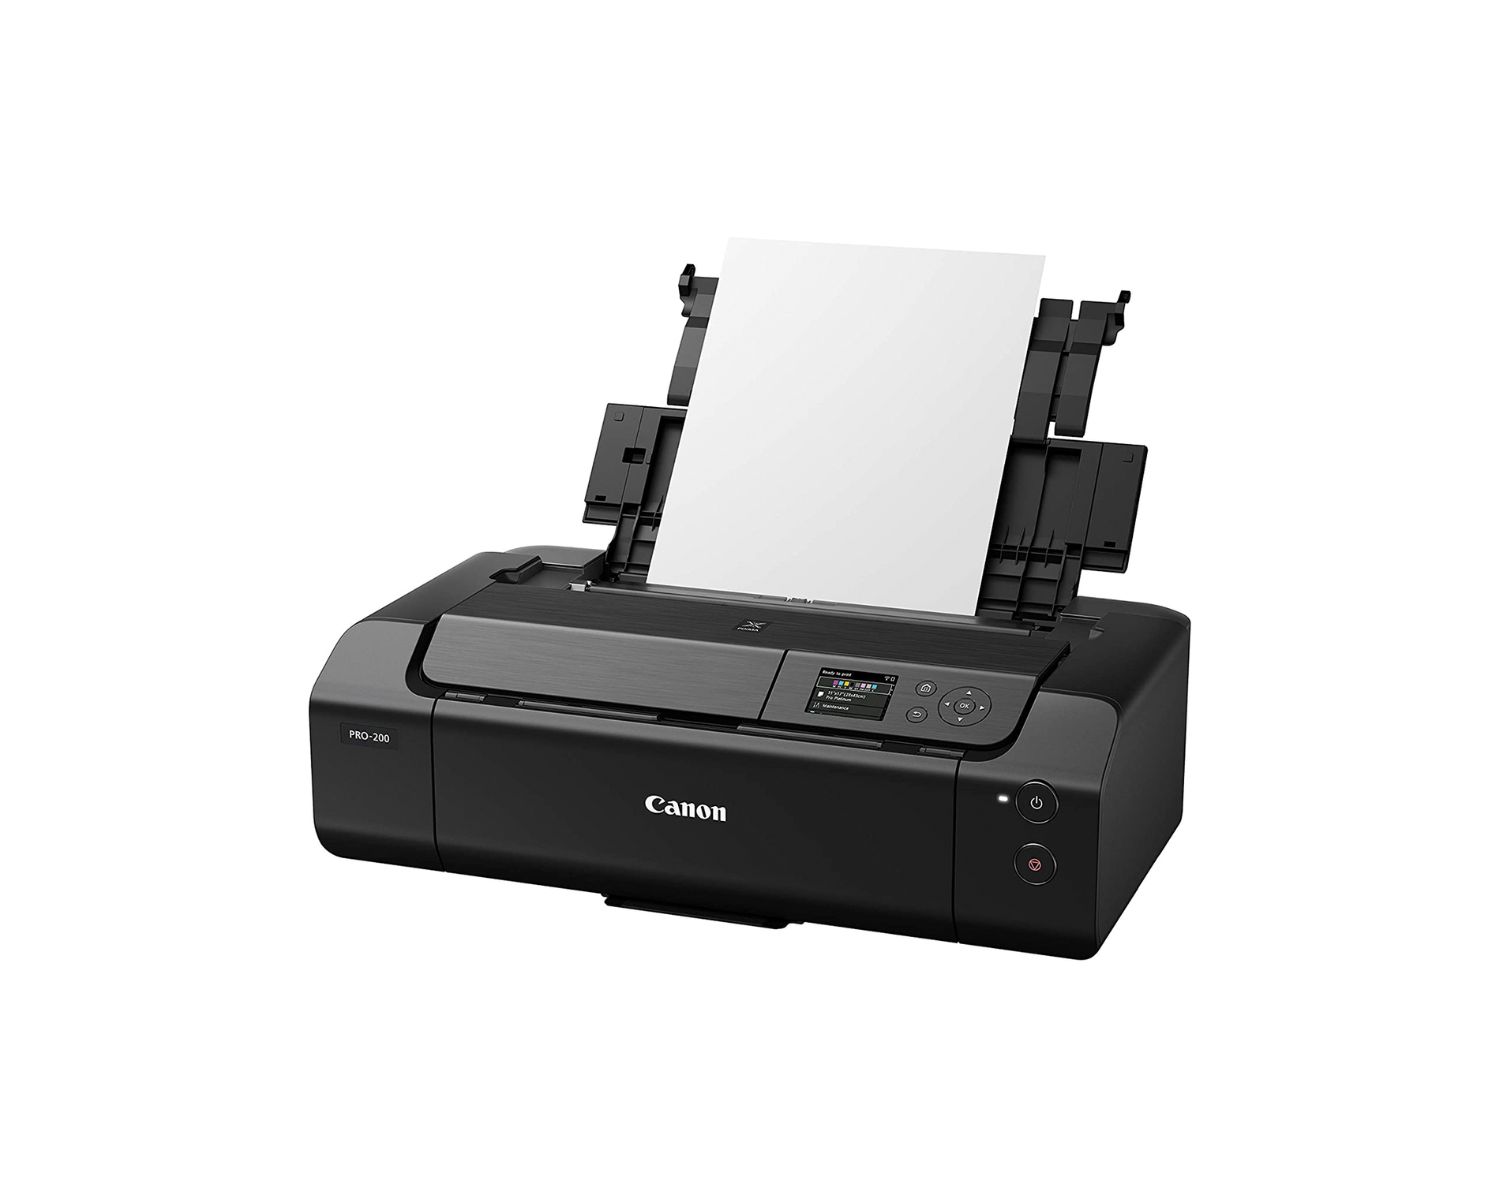 How To Install Canon Printer Without Cd